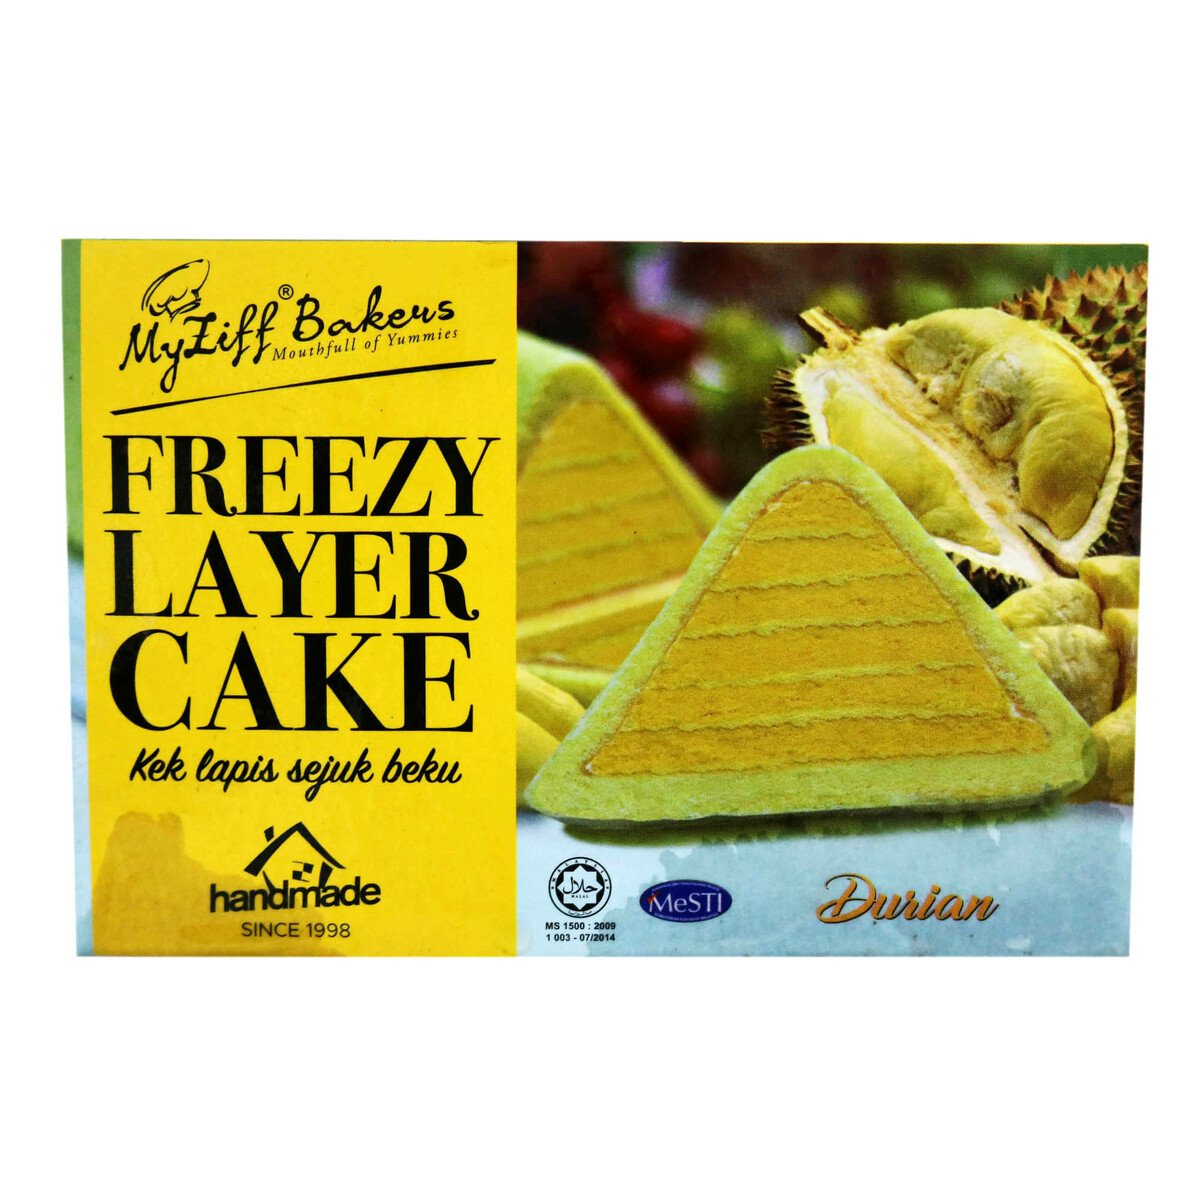 Myziff Bakers Freezy Layer Cake Durian 300g